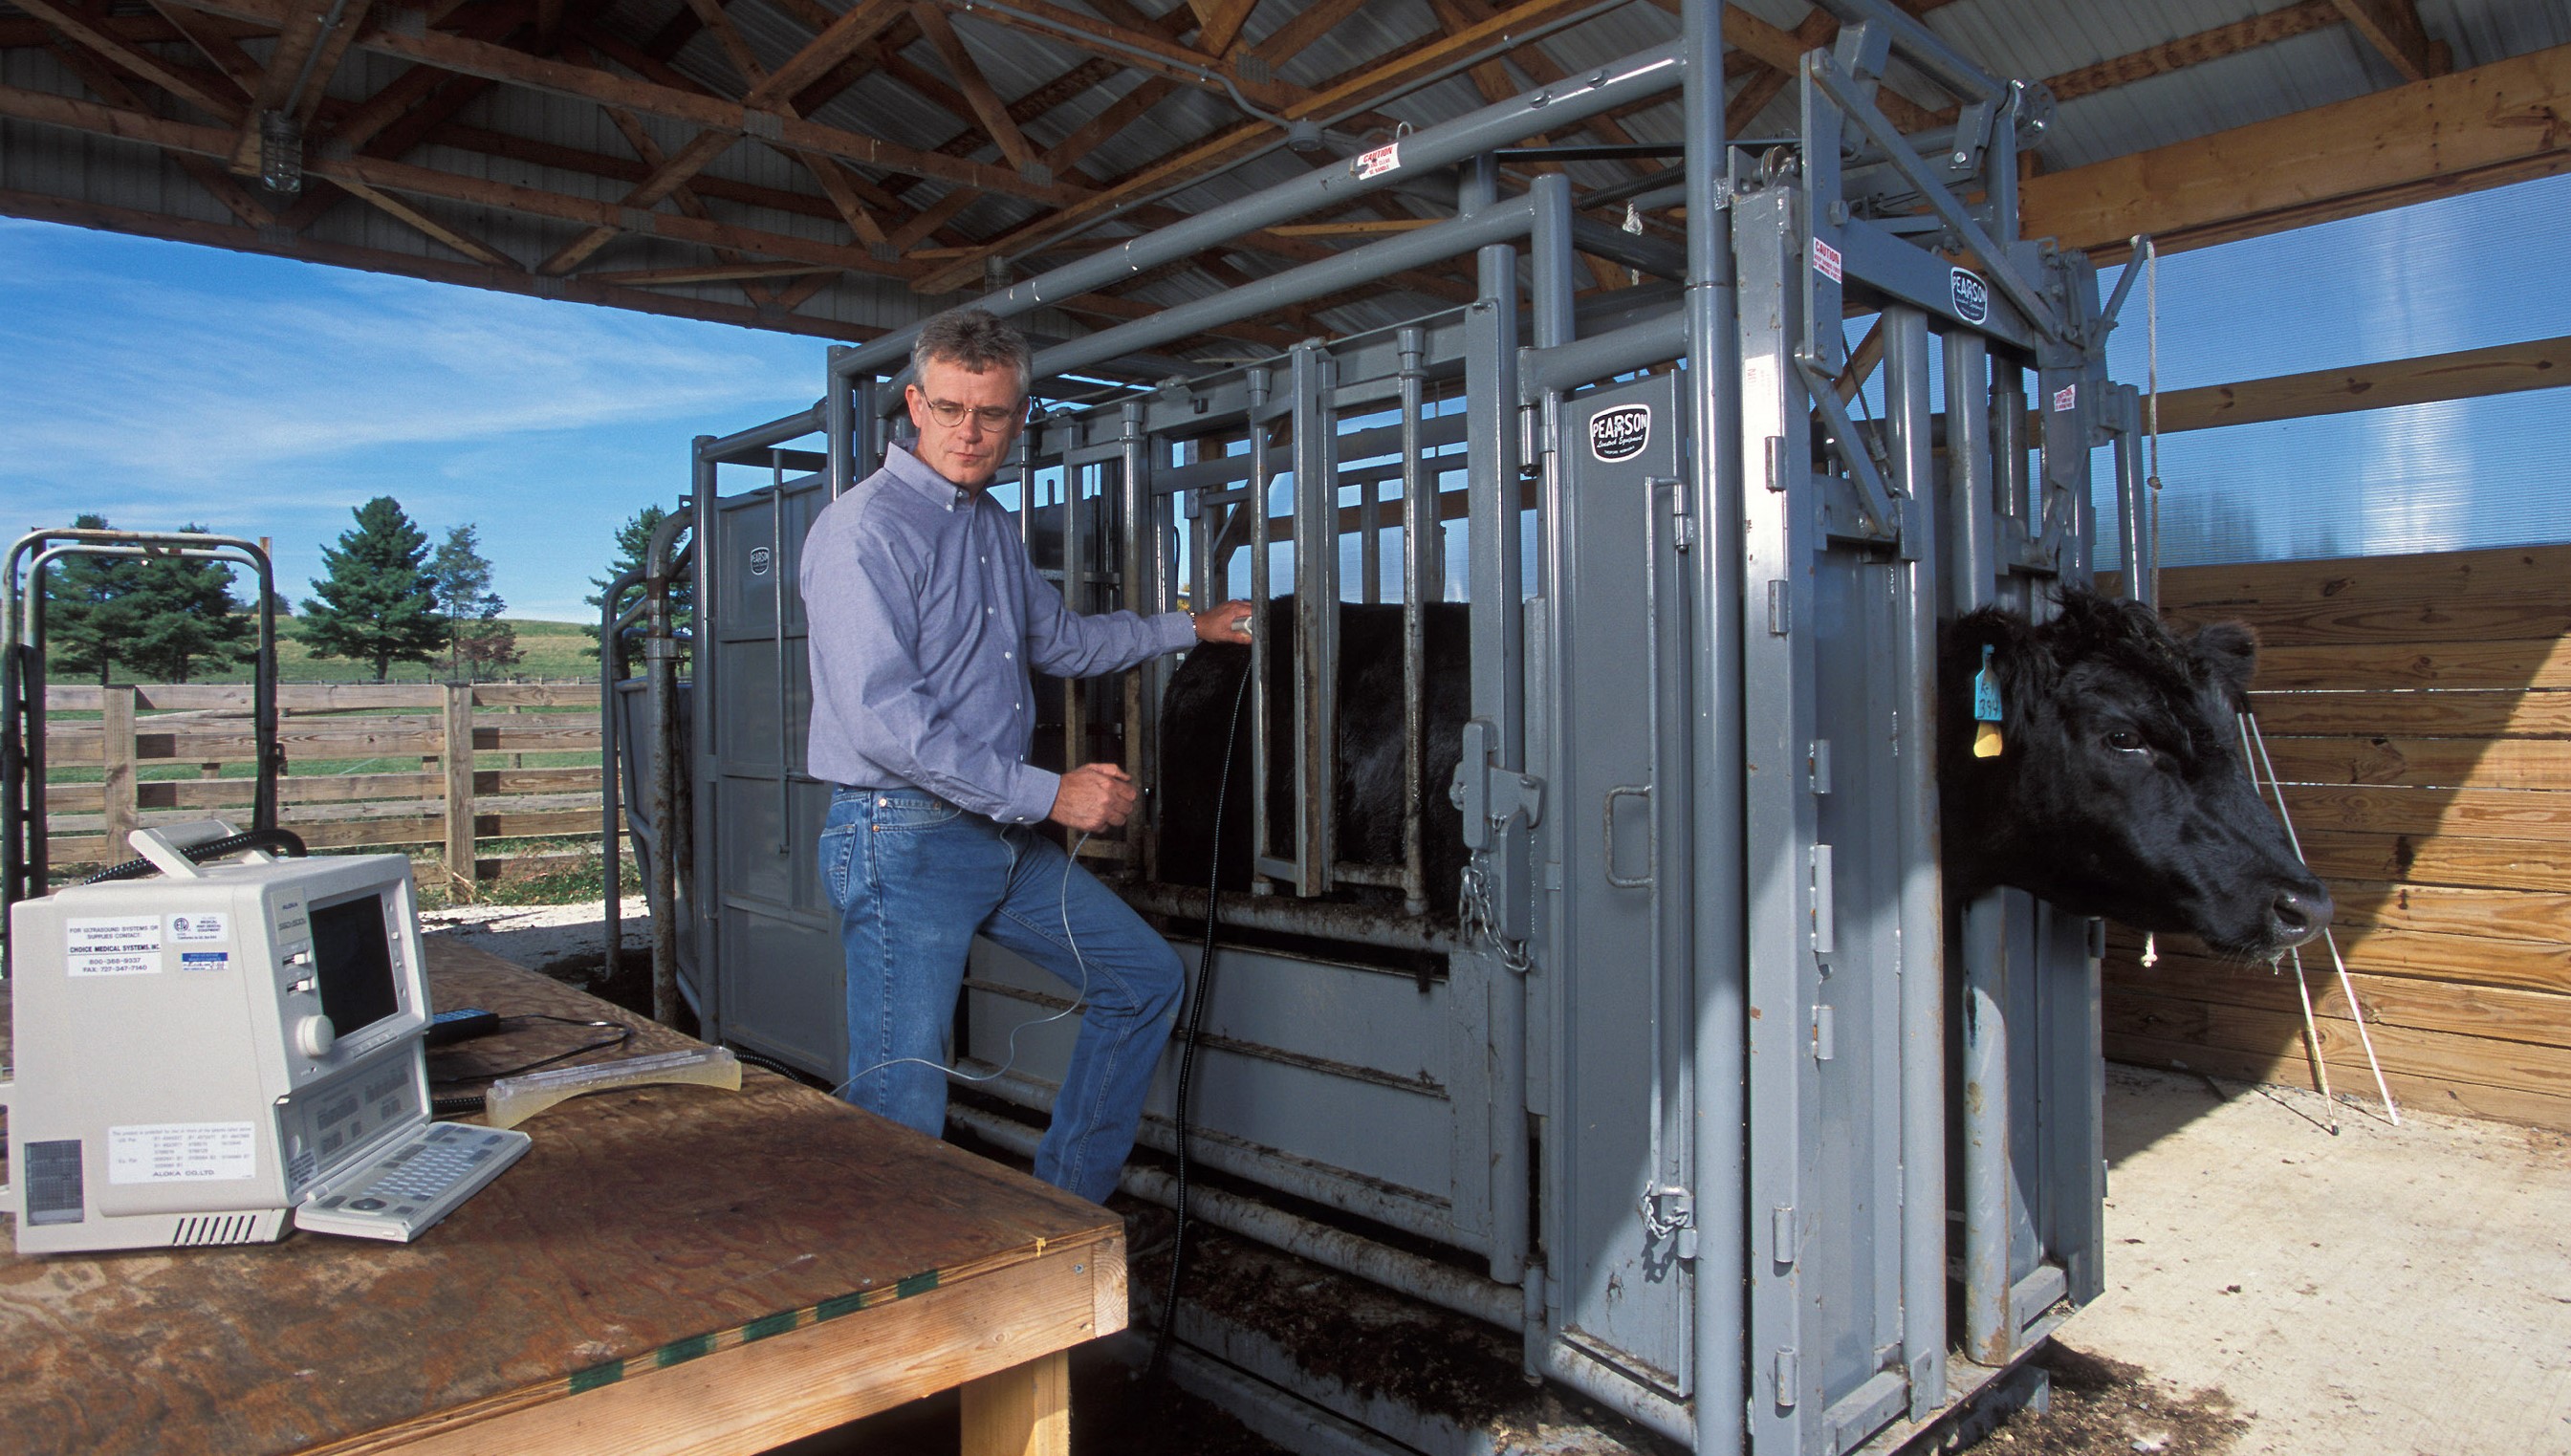 When is your livestock ready for market?